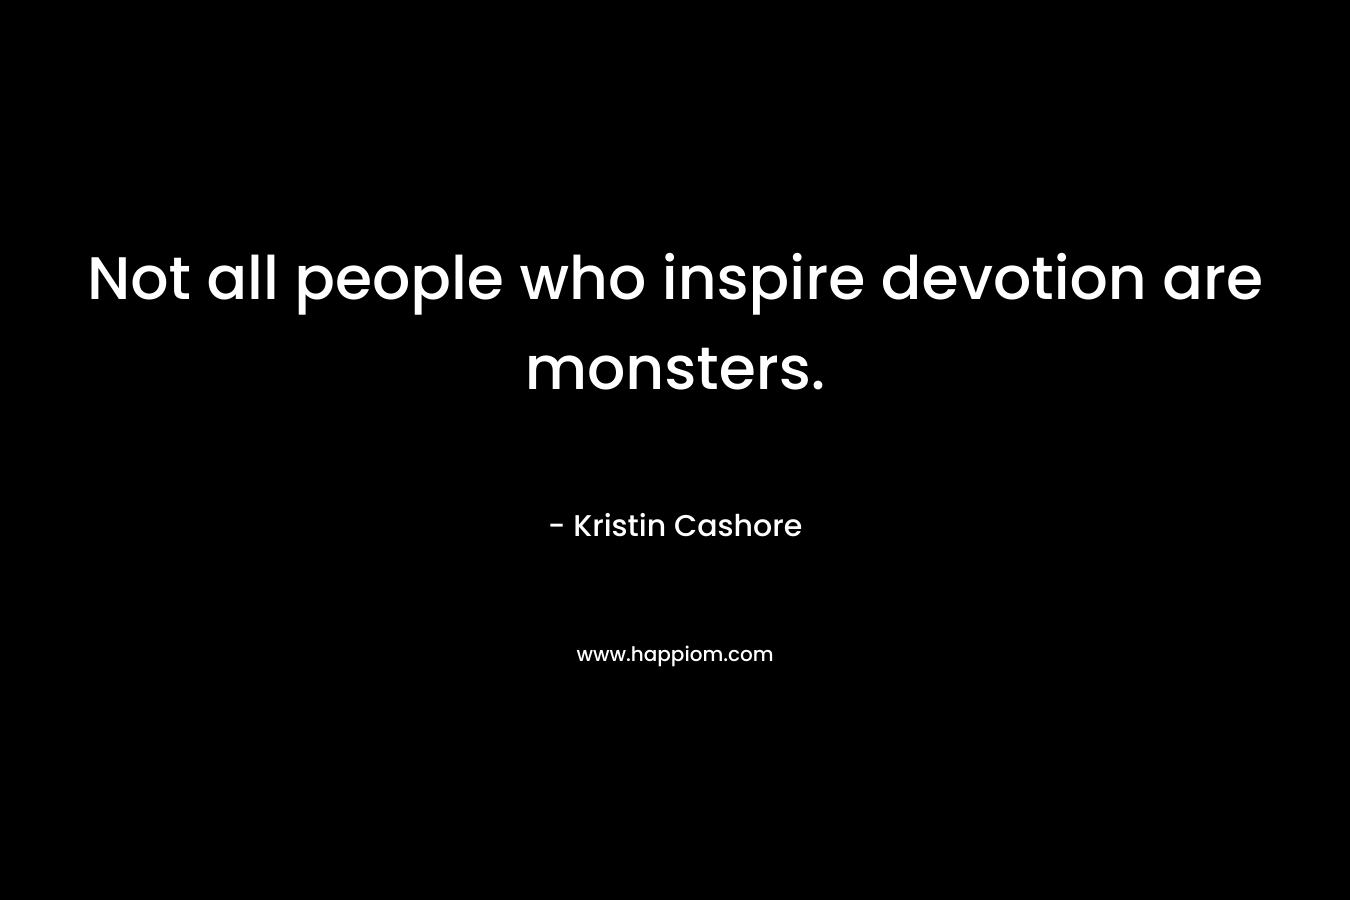 Not all people who inspire devotion are monsters.